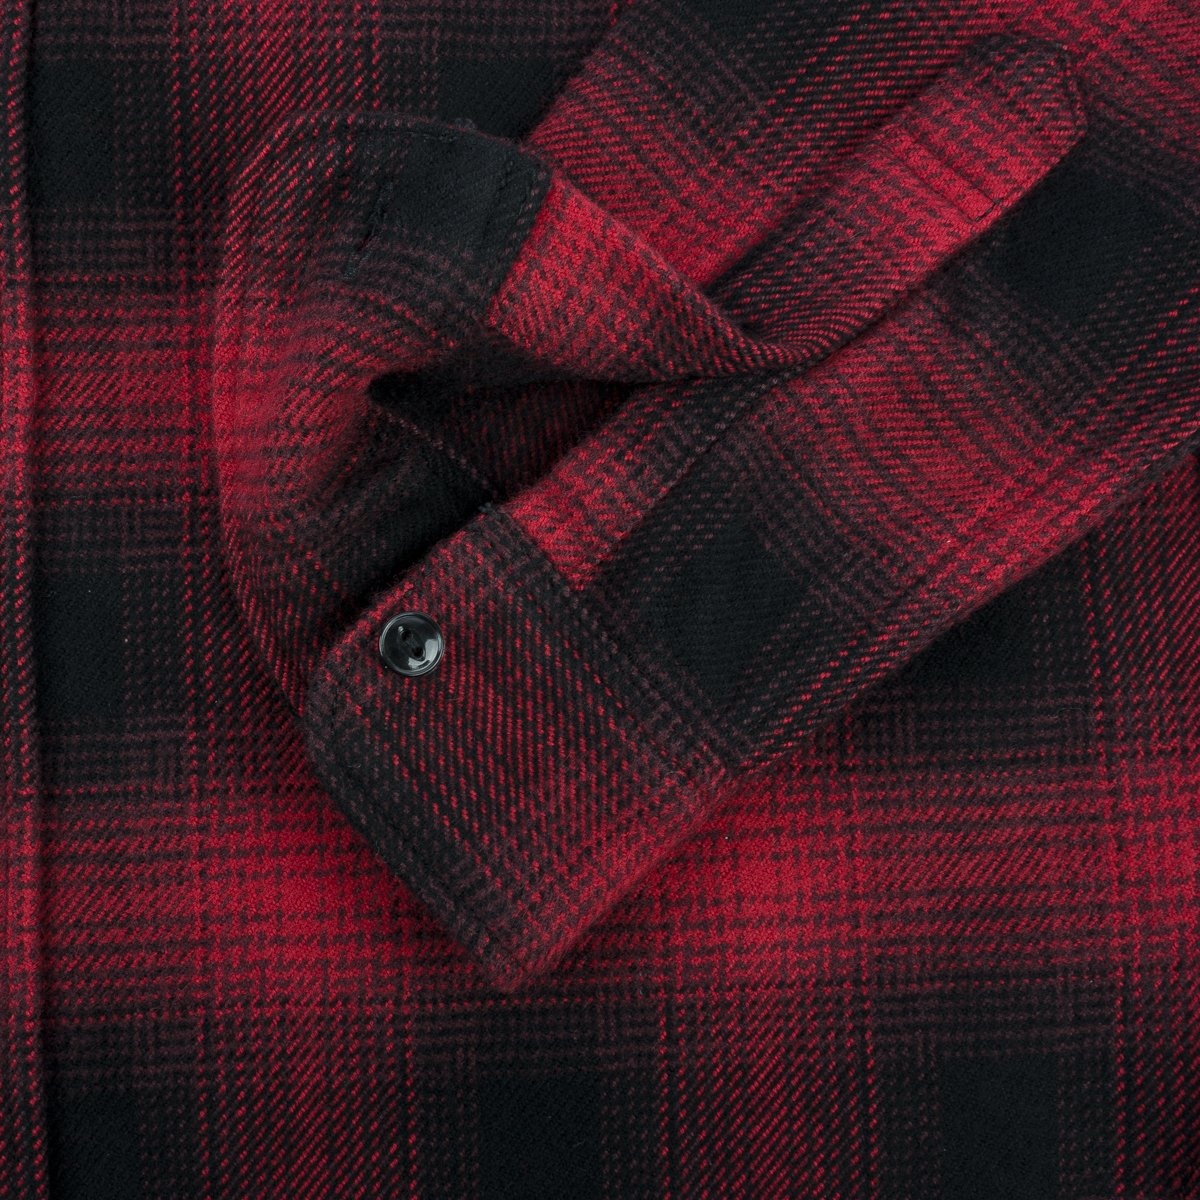 IHSH-265-RED Ultra Heavy Flannel Ombré Check Work Shirt - Red/Black - 11